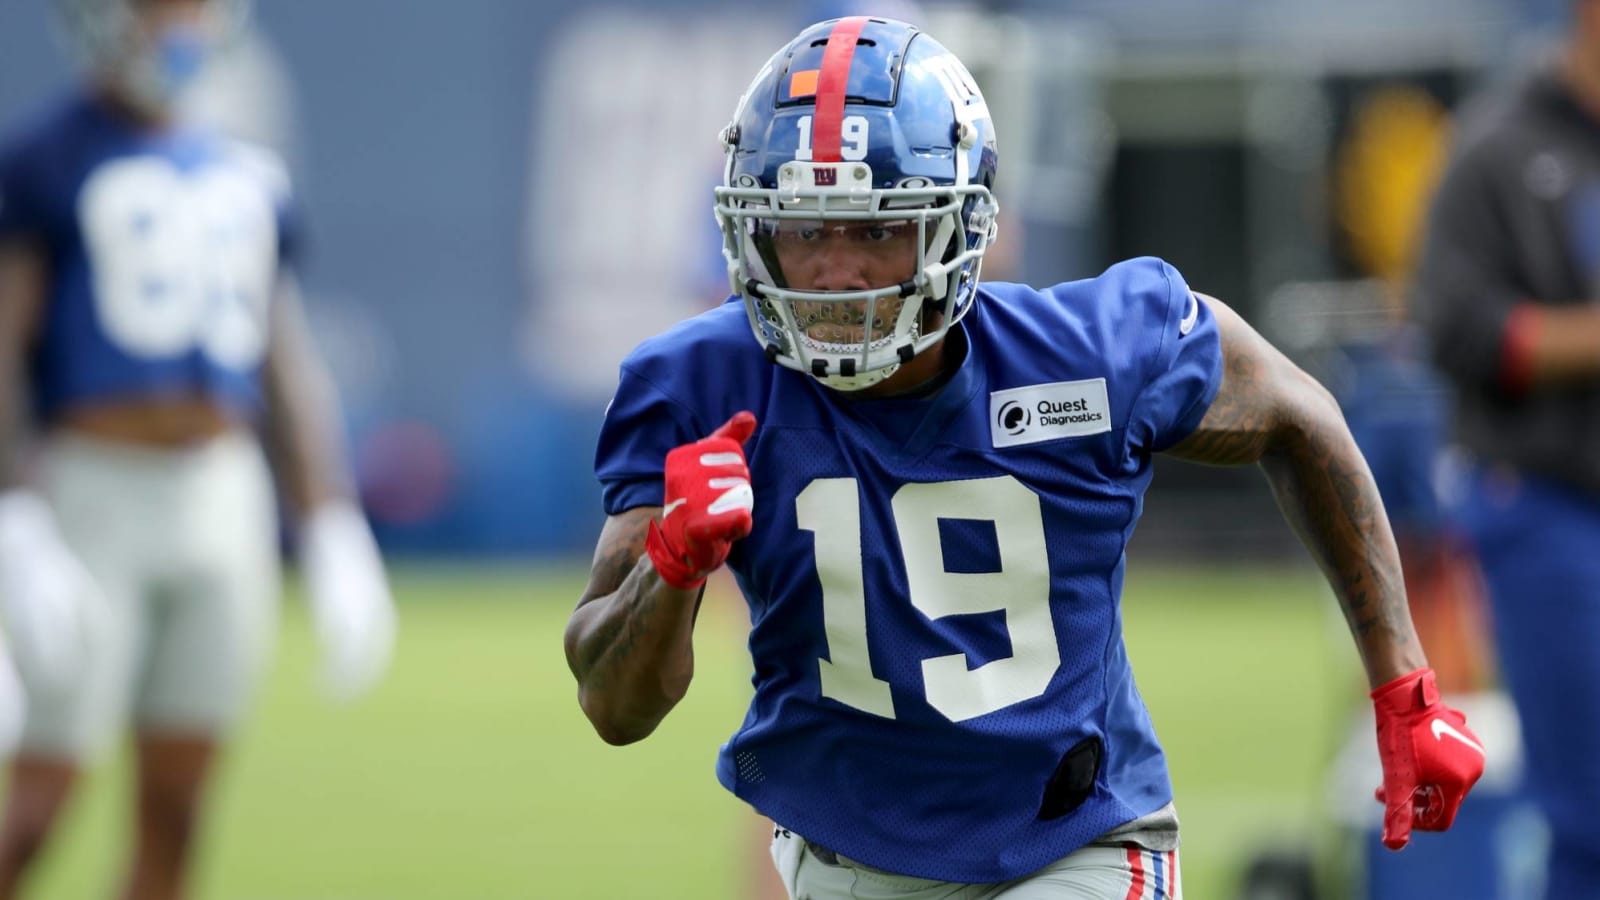 Kenny Golladay﻿ warns Giants offense could start 'slow' early in season